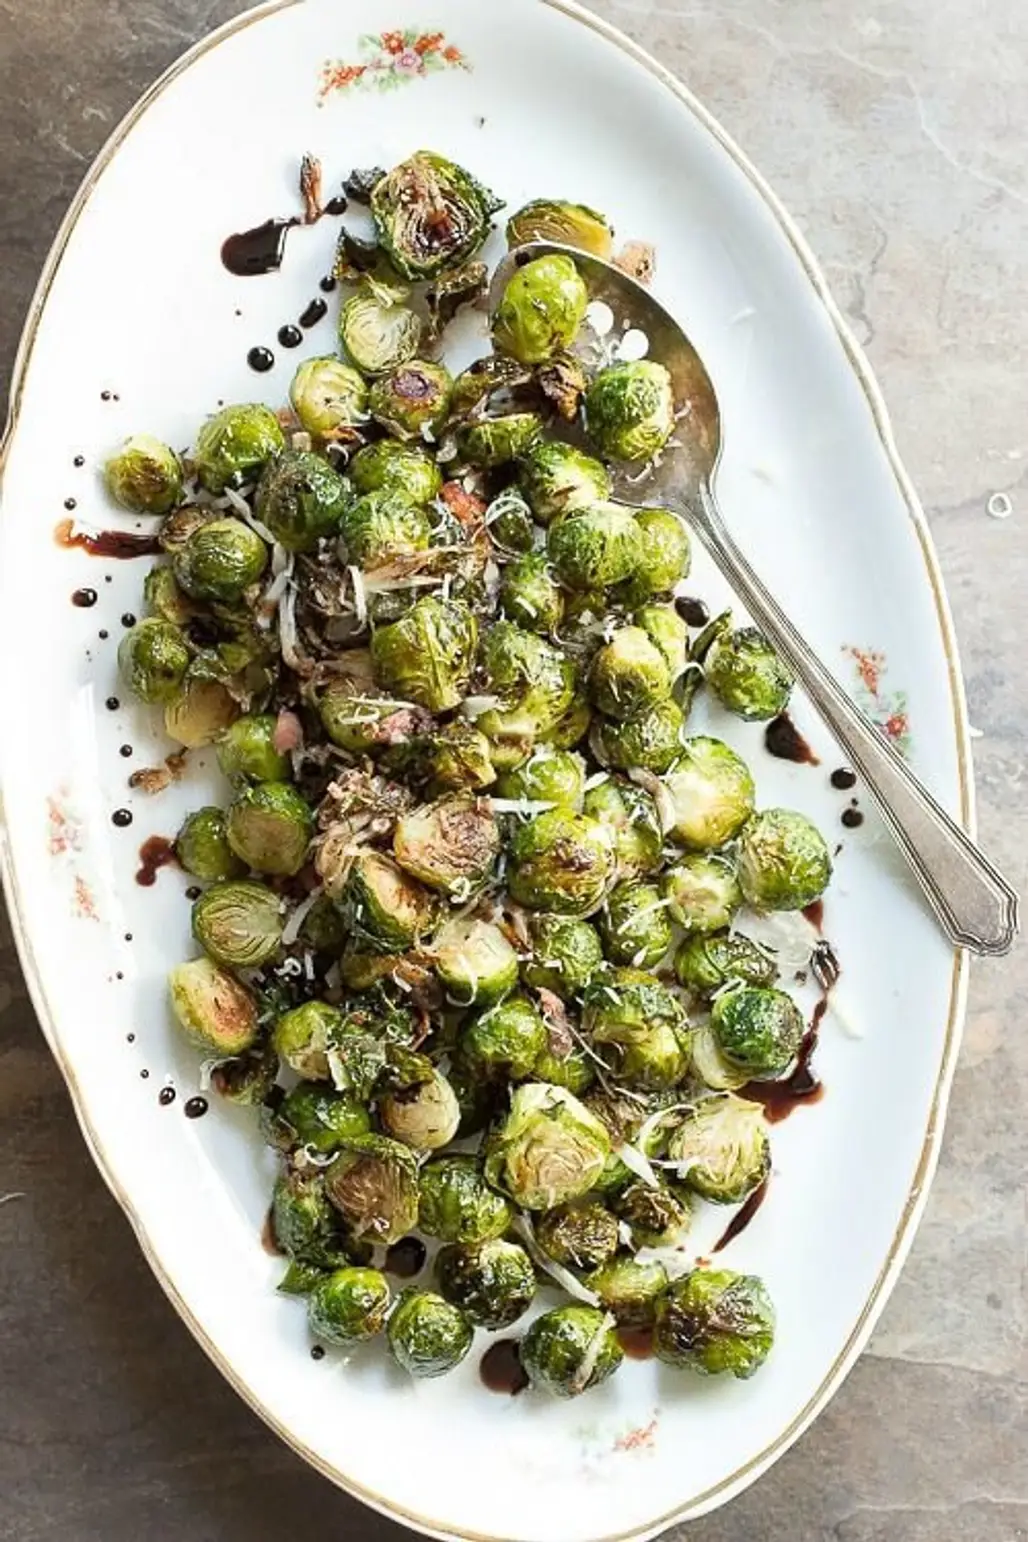 Balsamic Roasted Brussel Sprouts, so Great!